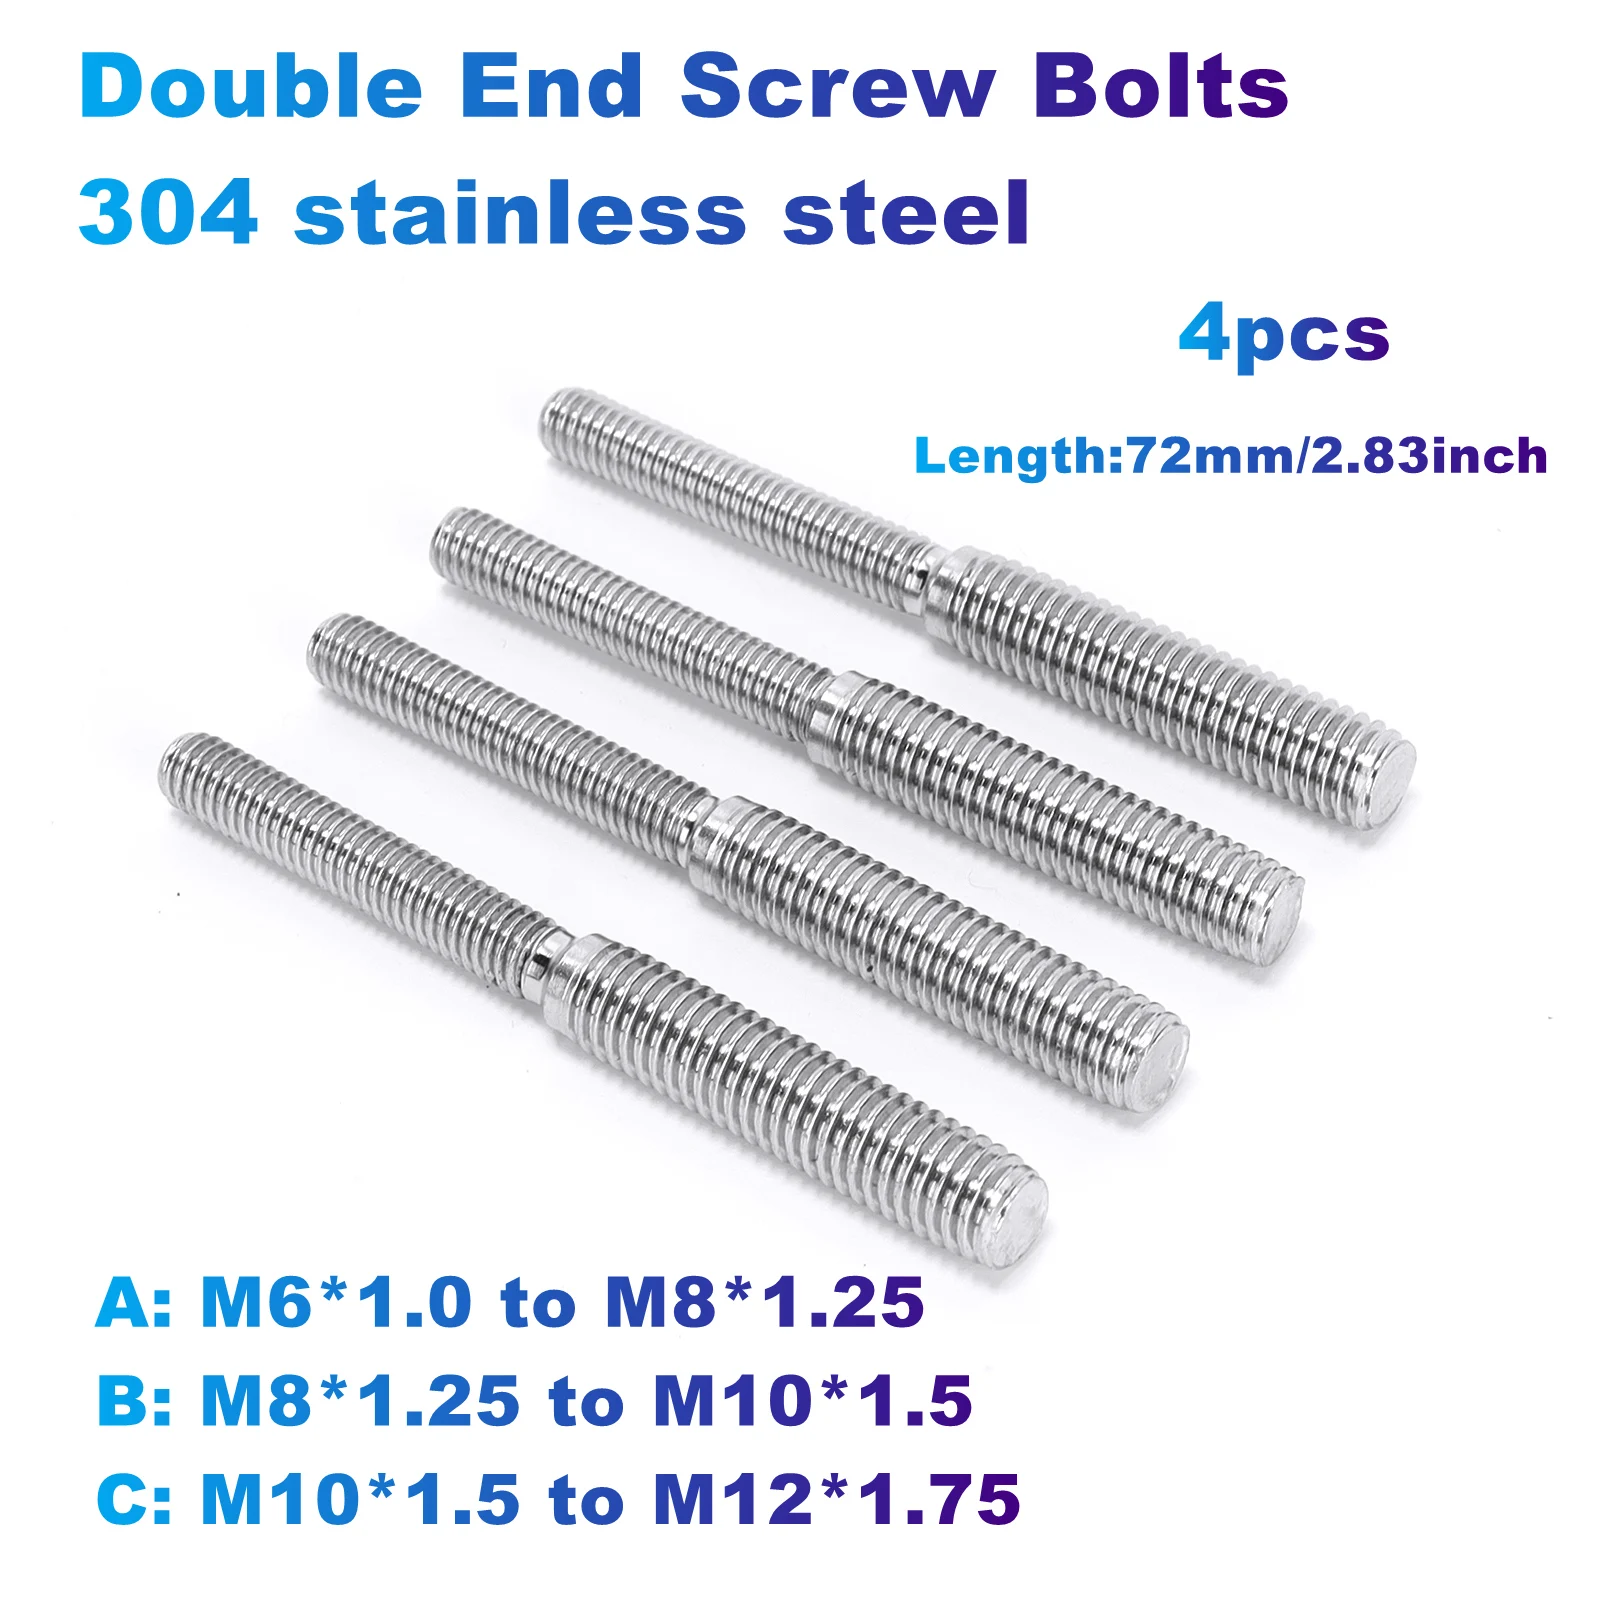 4Pcs Double End Screw Bolts 304 Stainless Steel M6*1.0 to M8*1.25/M8*1.25 to M10*1.5/M10*1.5 to M12*1.75 Threaded Stud Fasteners